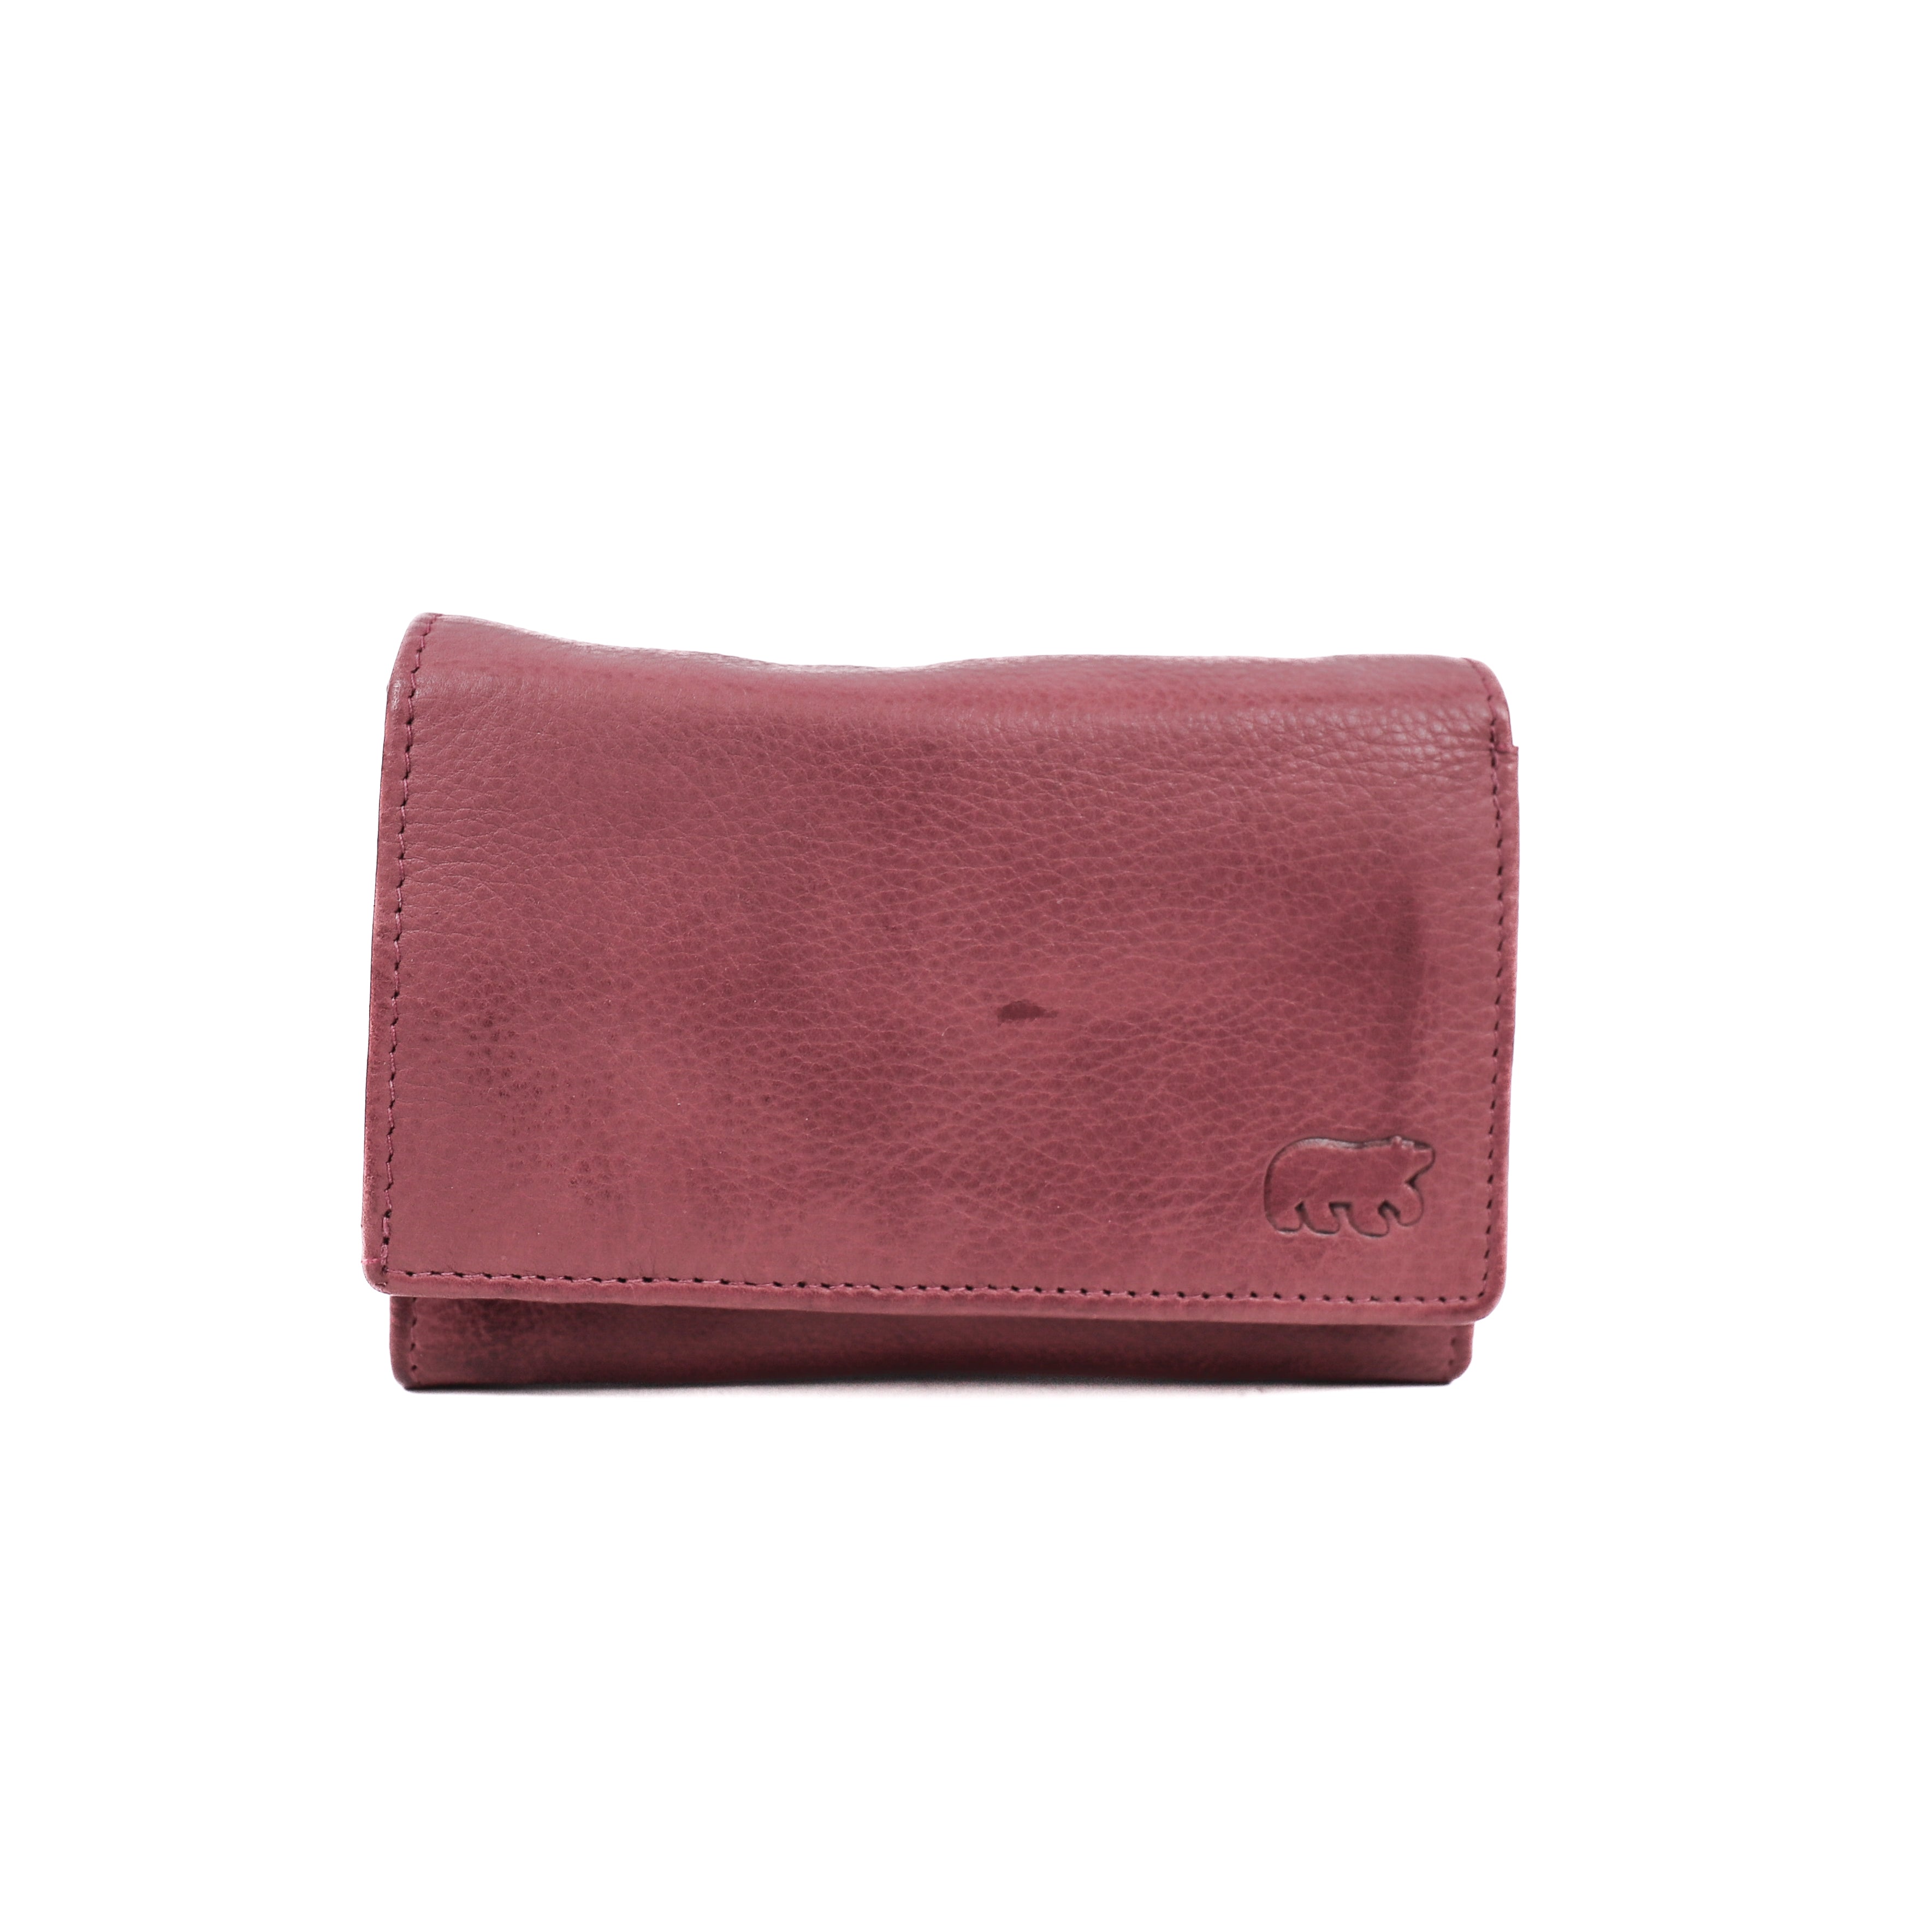 Wrap wallet 'Sweety' tufting